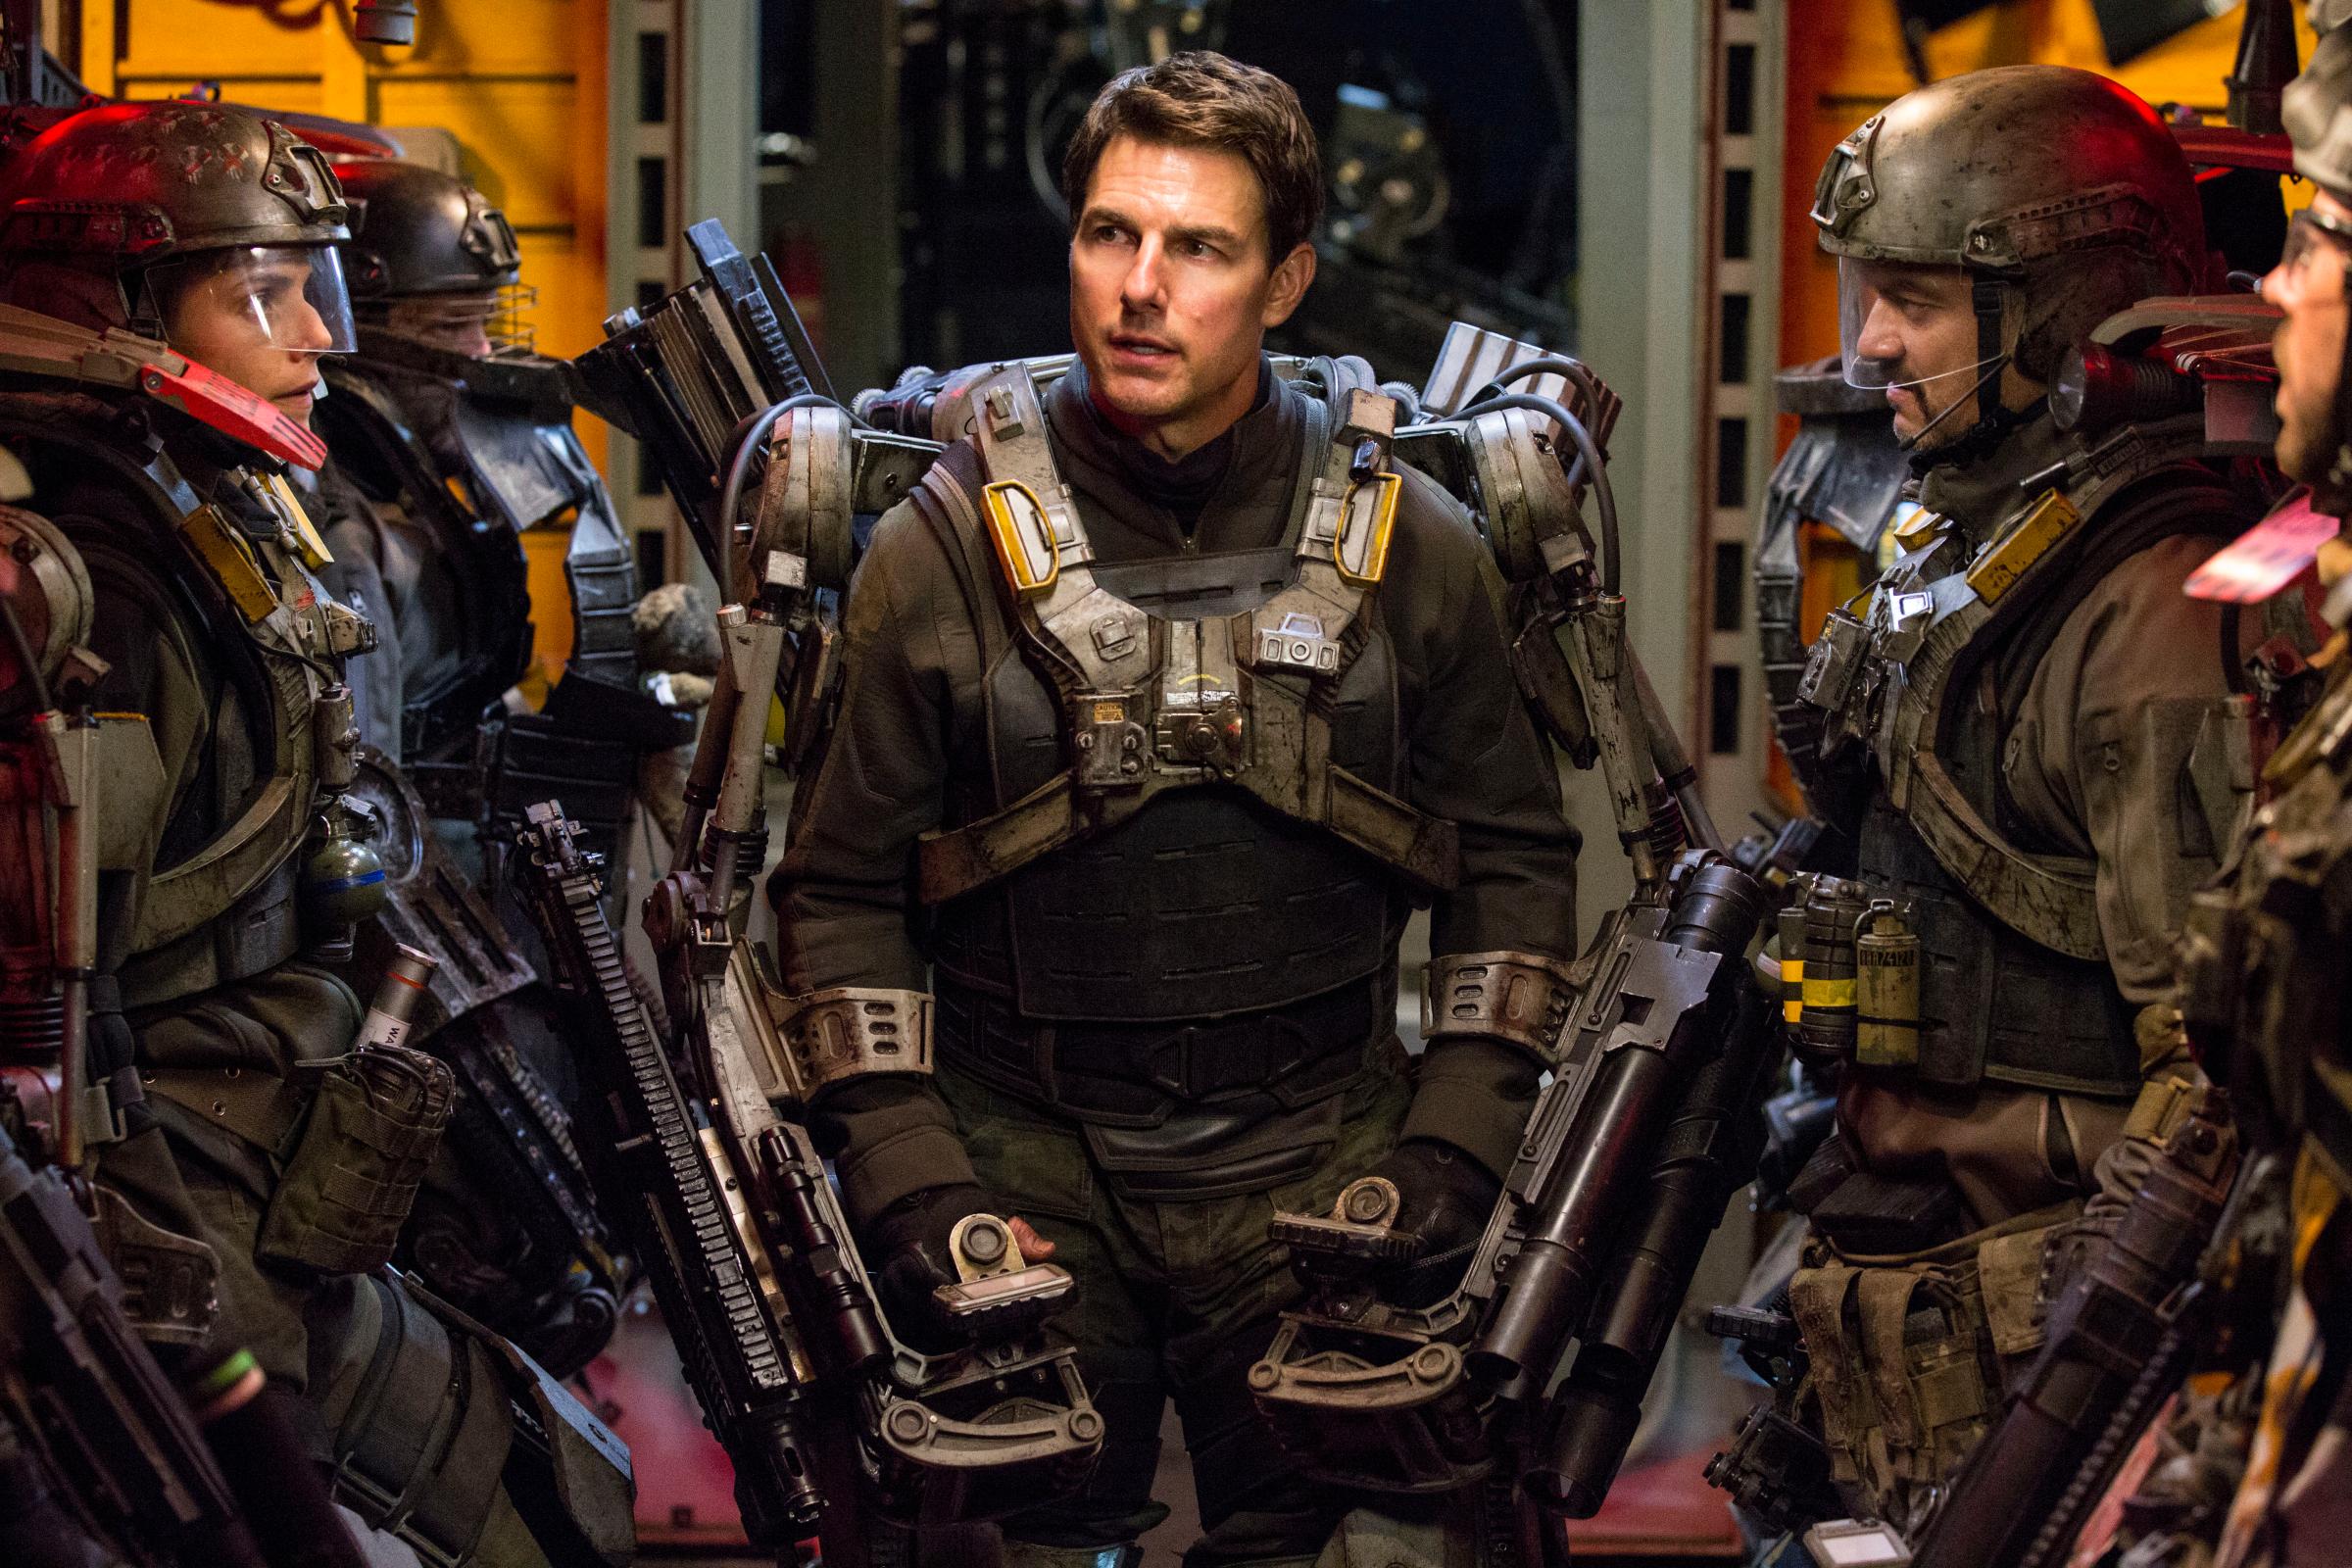 Tom Cruise as Major William "Bill" Cage in Edge of Tomorrow, 2014.